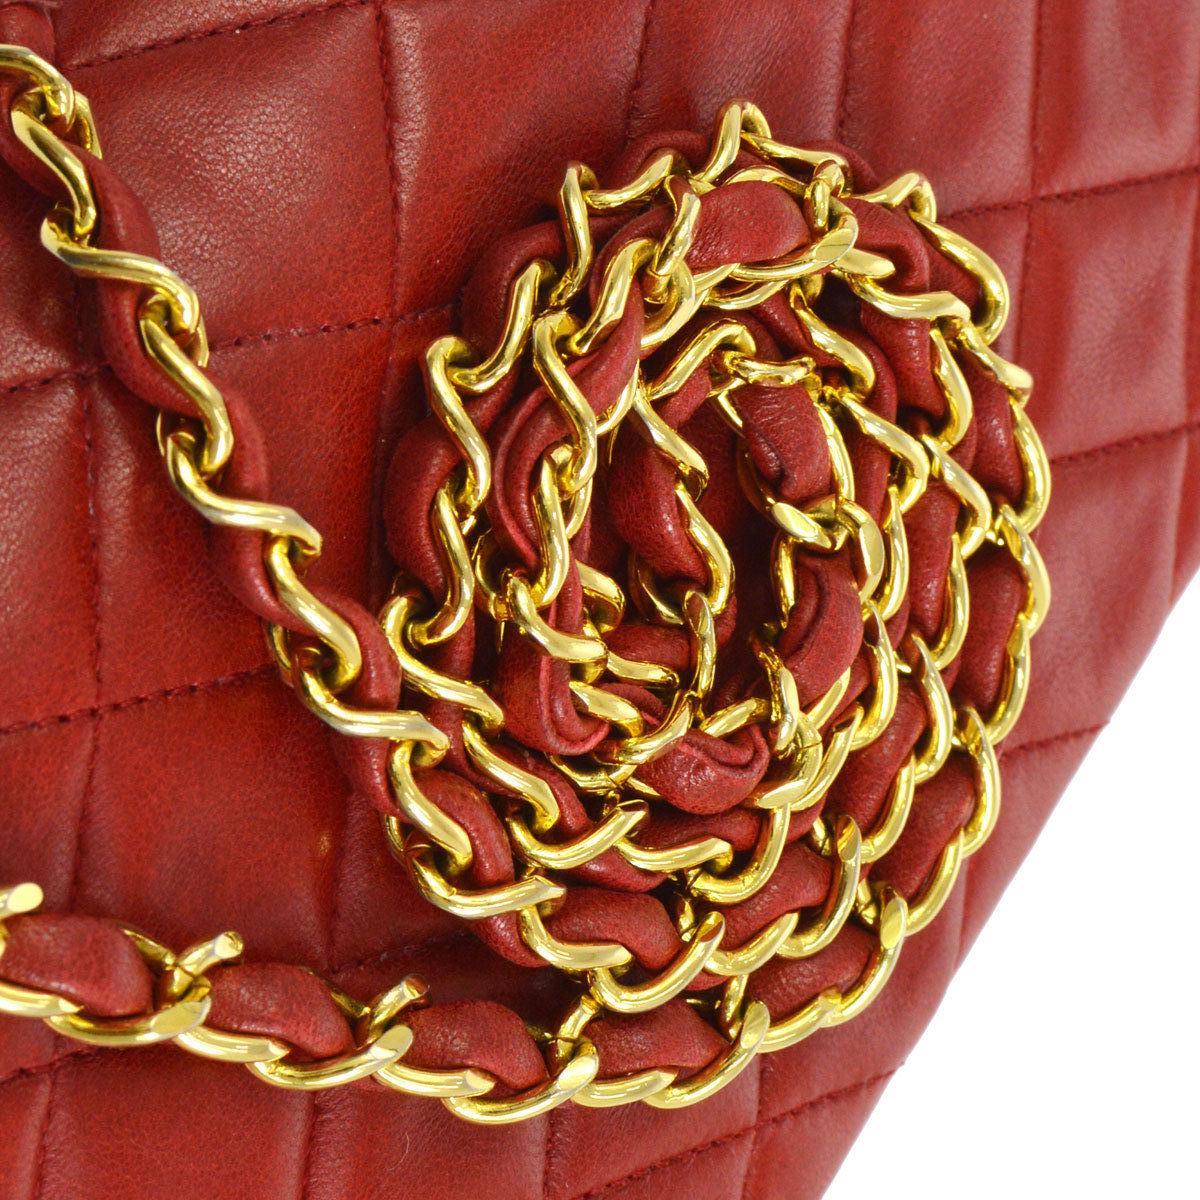 Chanel Red Leather Logo Gold Evening Small Single Shoulder Flap Bag

Leather
Gold tone hardware
Leather lining
Date code present
Made in France
Shoulder strap drop 19.5